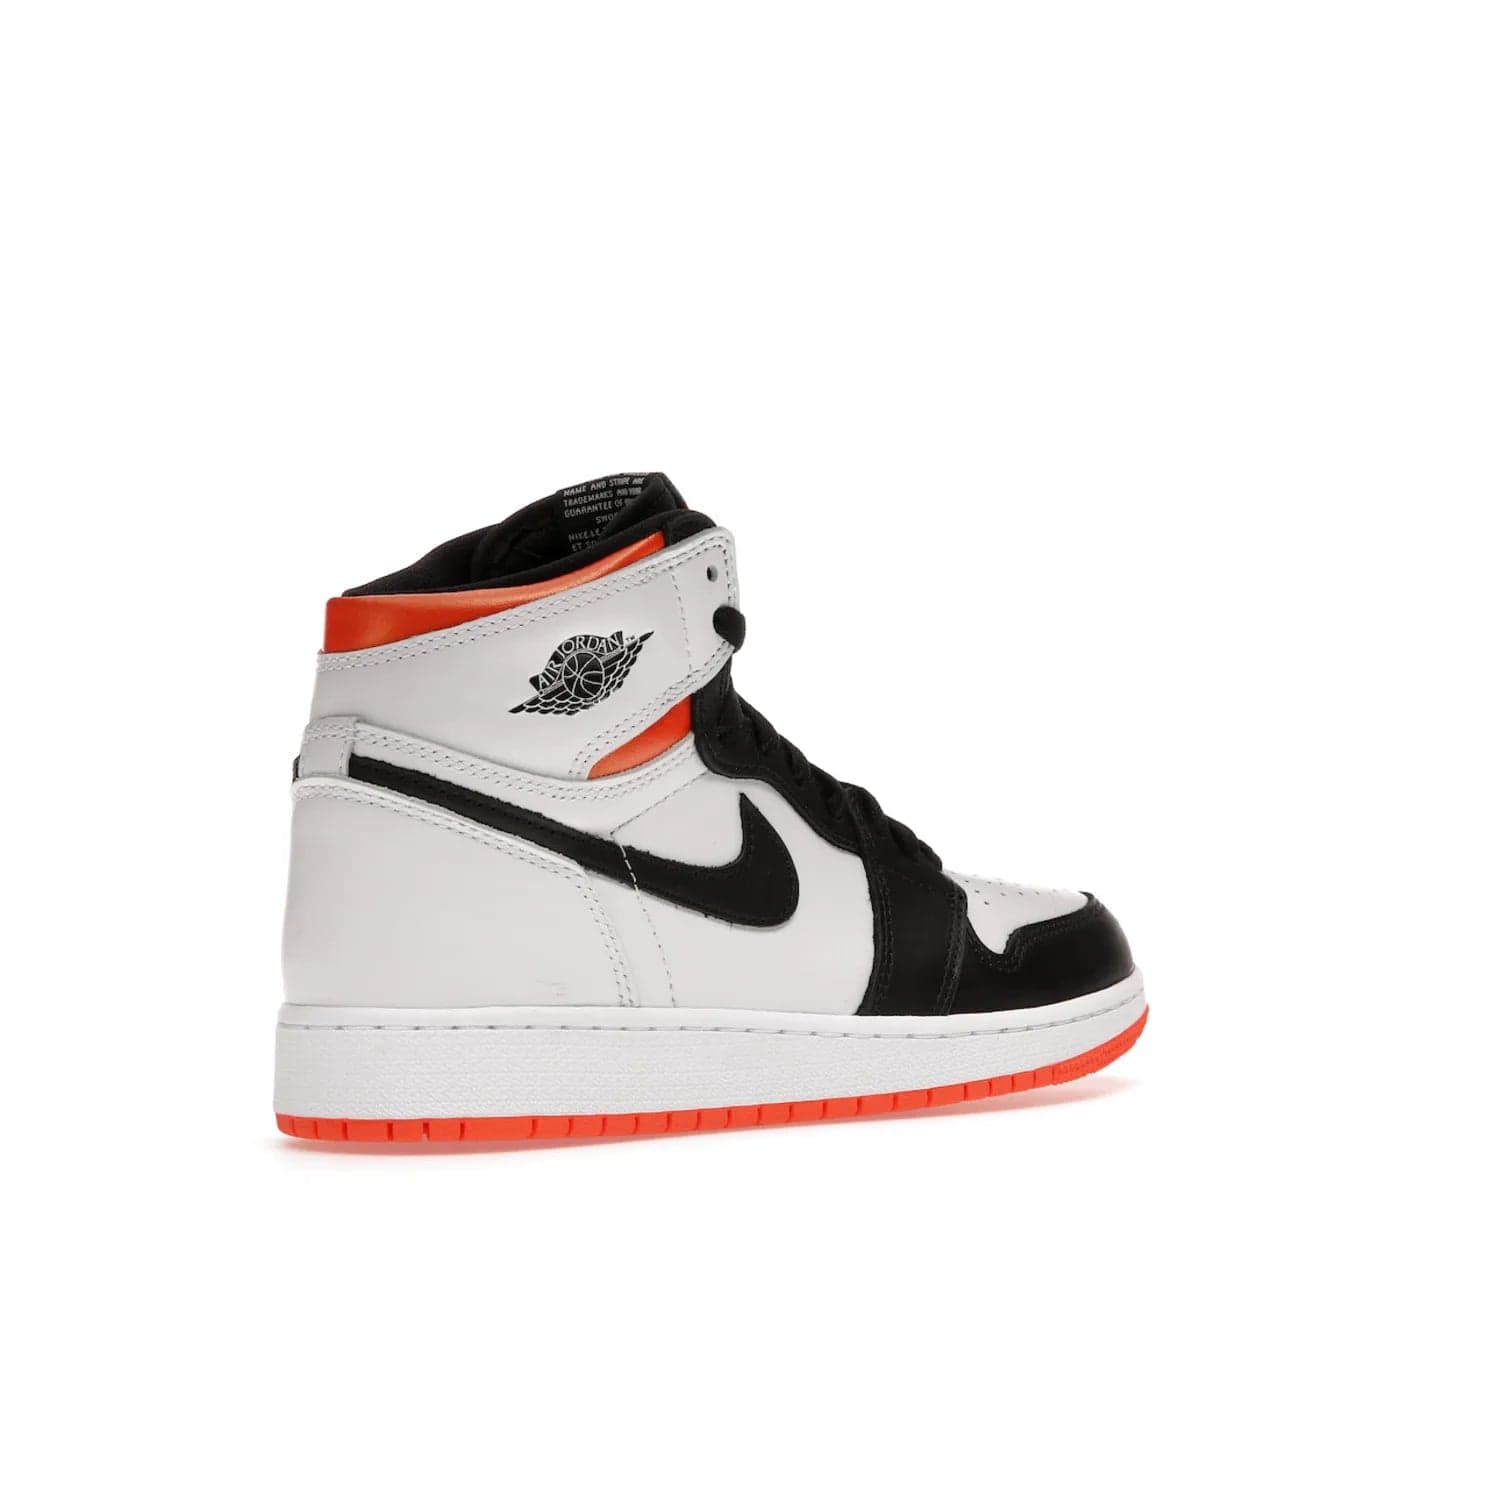 Jordan 1 High OG Electro Orange (GS) - Image 33 - Only at www.BallersClubKickz.com - The Air Jordan 1 High OG Electro Orange GS is the ideal shoe for kids on the go. Featuring white leather uppers, black overlays, and bright orange accents, it's sure to become a favorite. A great mix of classic style and vibrant colors, the shoe delivers air cushioning for comfort and hard orange rubber for grip. Release on July 17th, 2021. Get them a pair today.